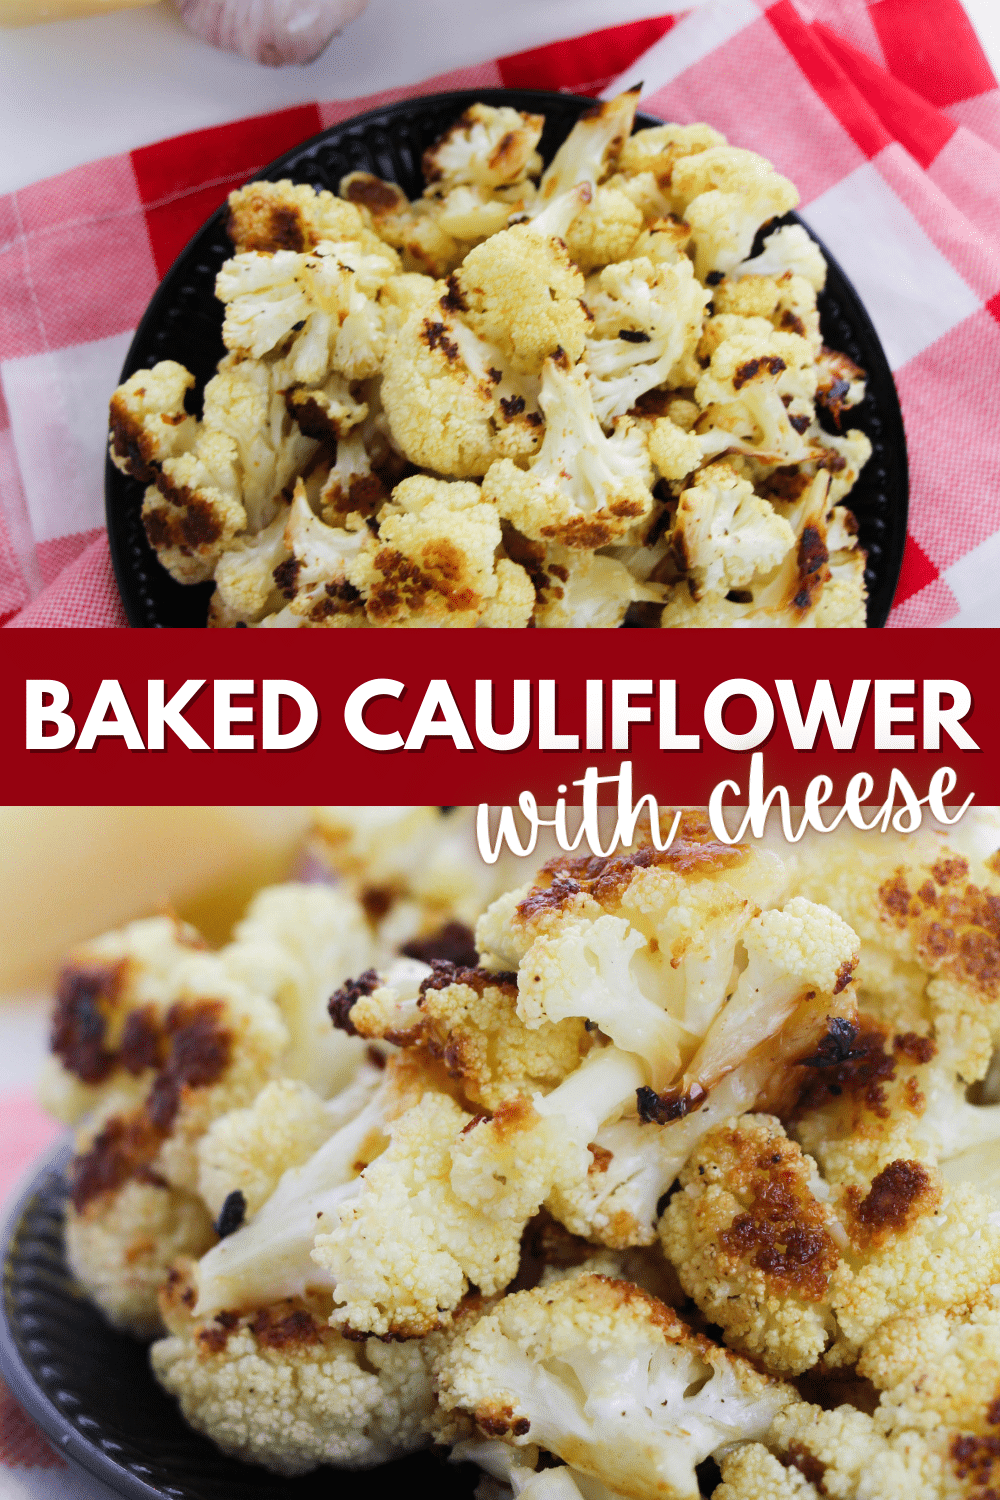 Baked cauliflower with cheese.